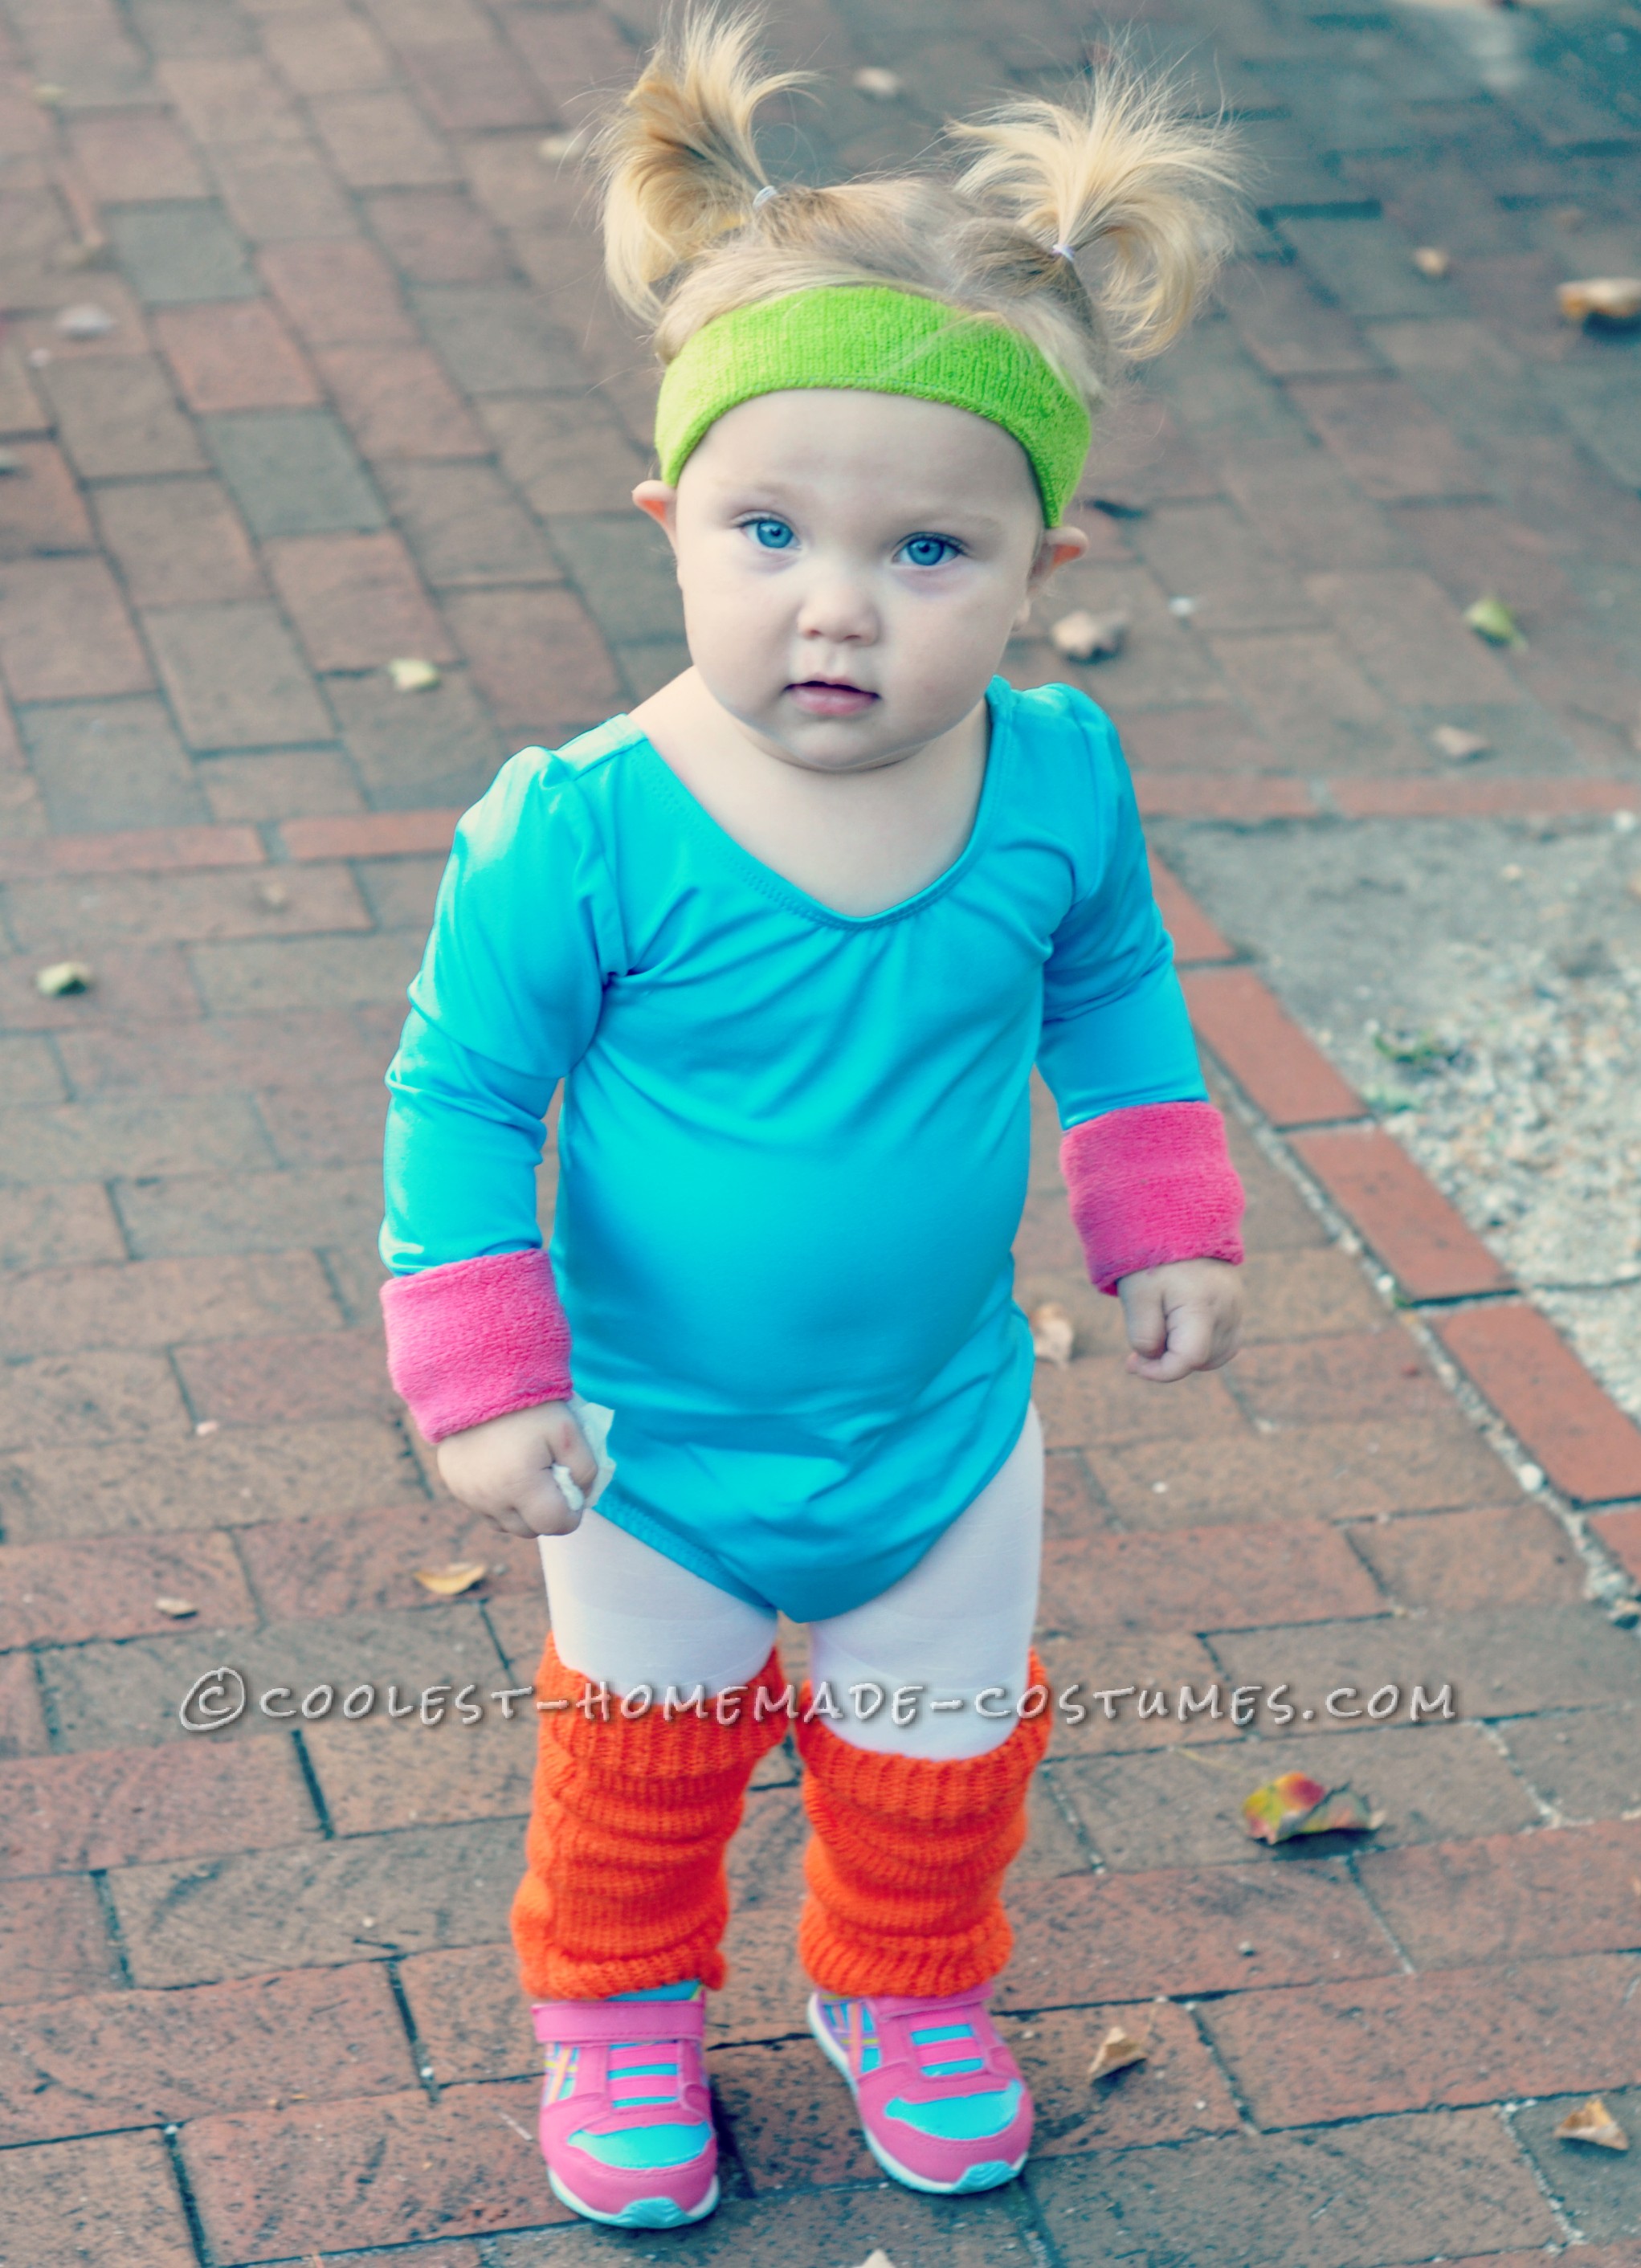 Cute Jane Fonda 80's Workout Costume for a Toddler